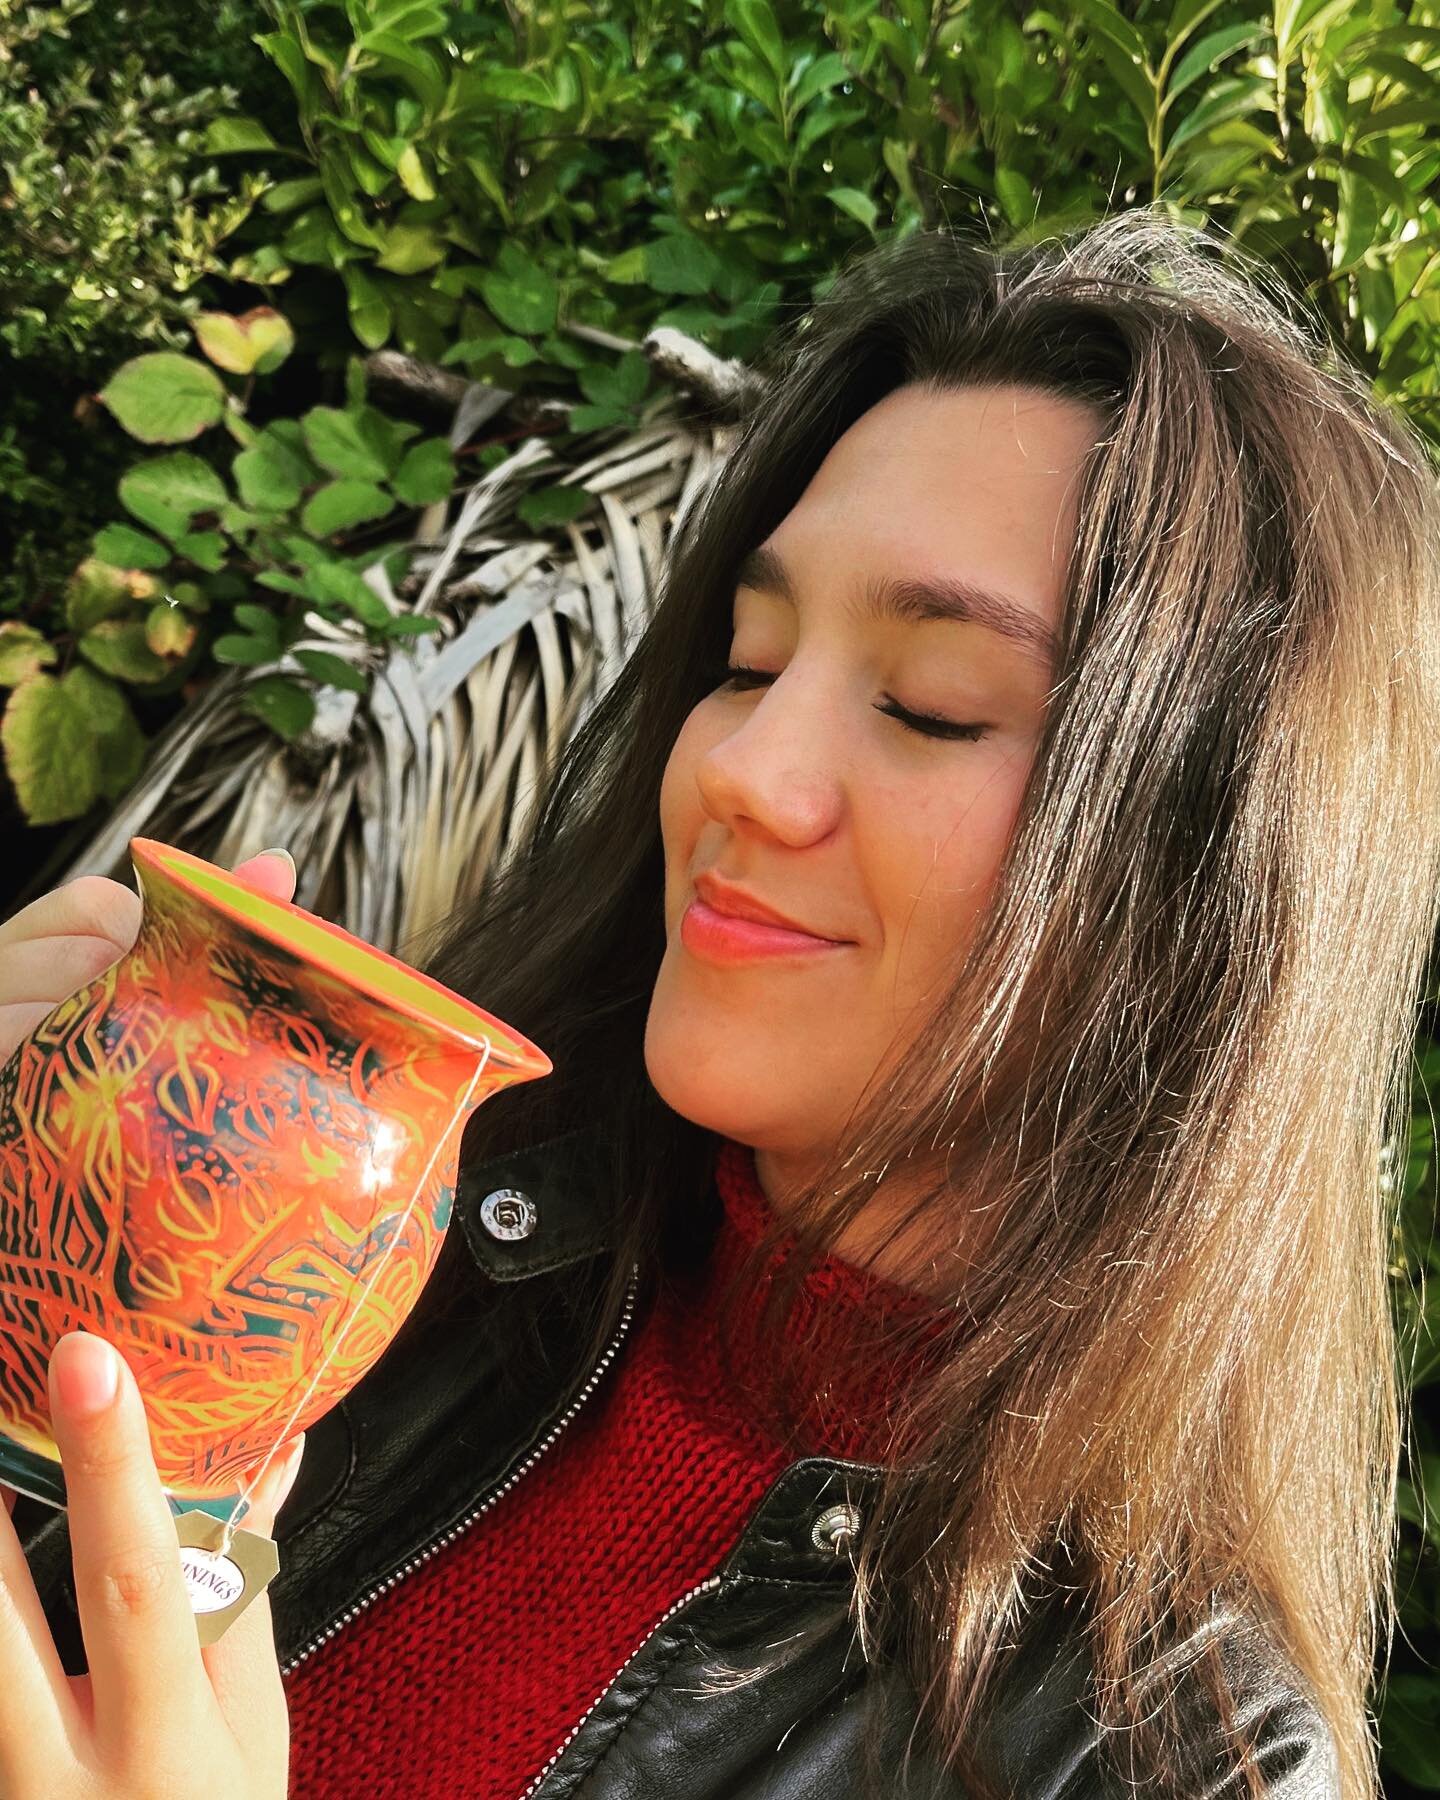 Yummy mugs handmade just for you! Check out the fresh batch hot out of the big kiln at Georgina Lohan Studio, 1161 Parker Street, opening for the Eastside Culture Crawl November 16-19! @culturecrawl @design_interior_homes @vancouverwomeninbusiness @w